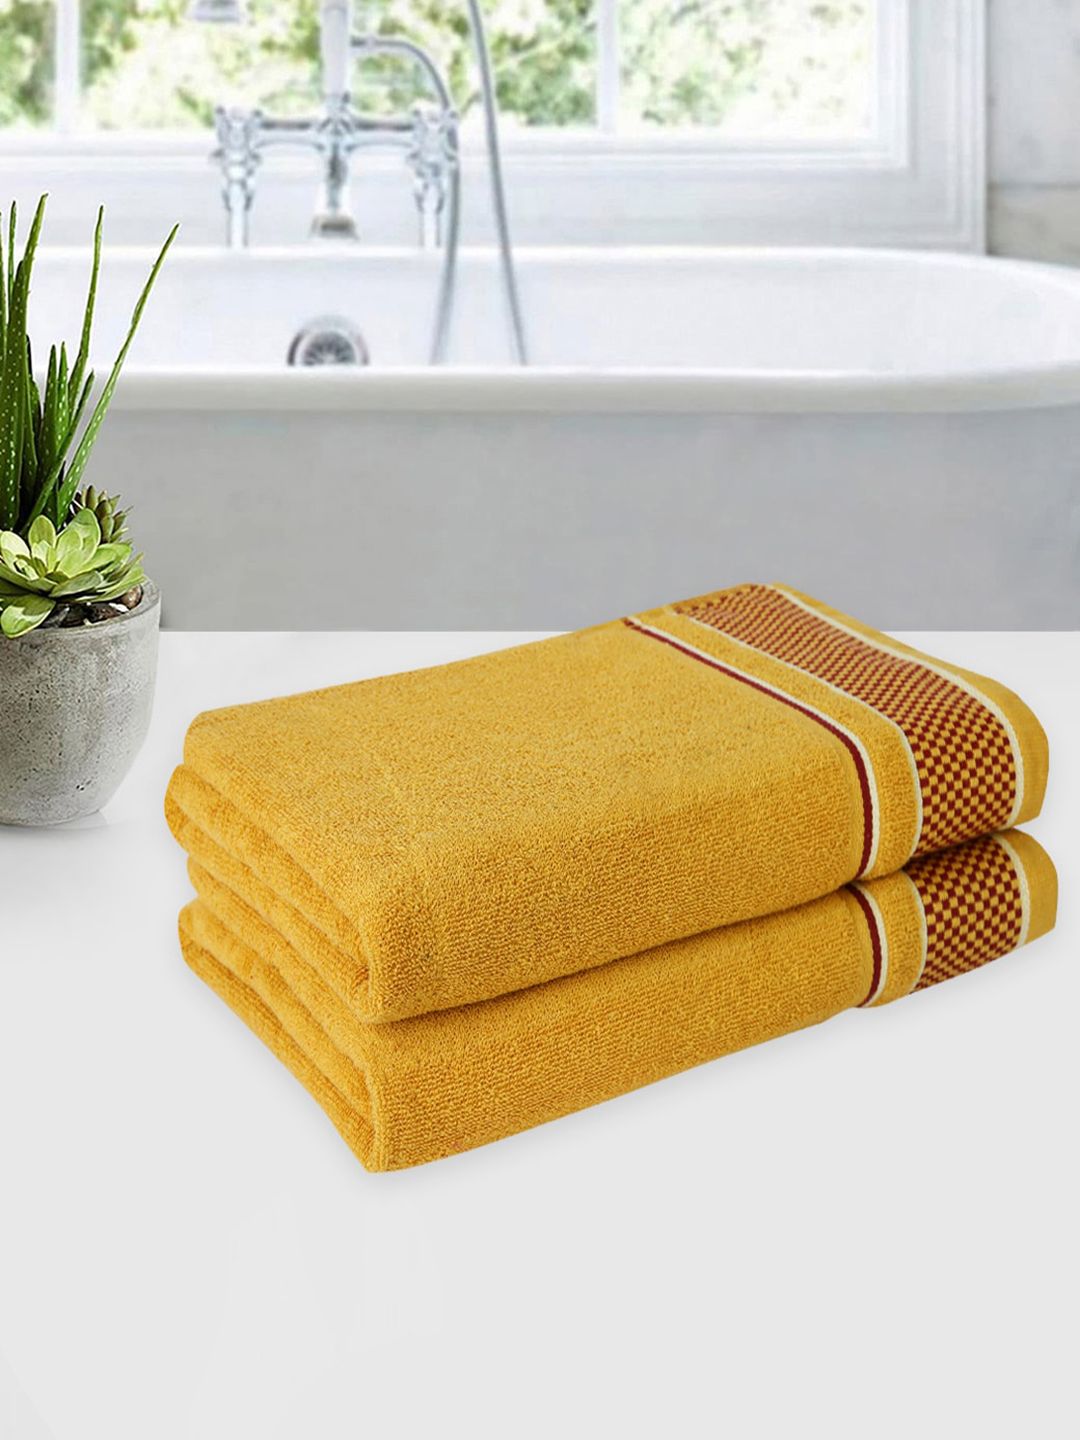 ROMEE Set Of 2 Yellow Cotton 500 GSM Bath Towels Price in India